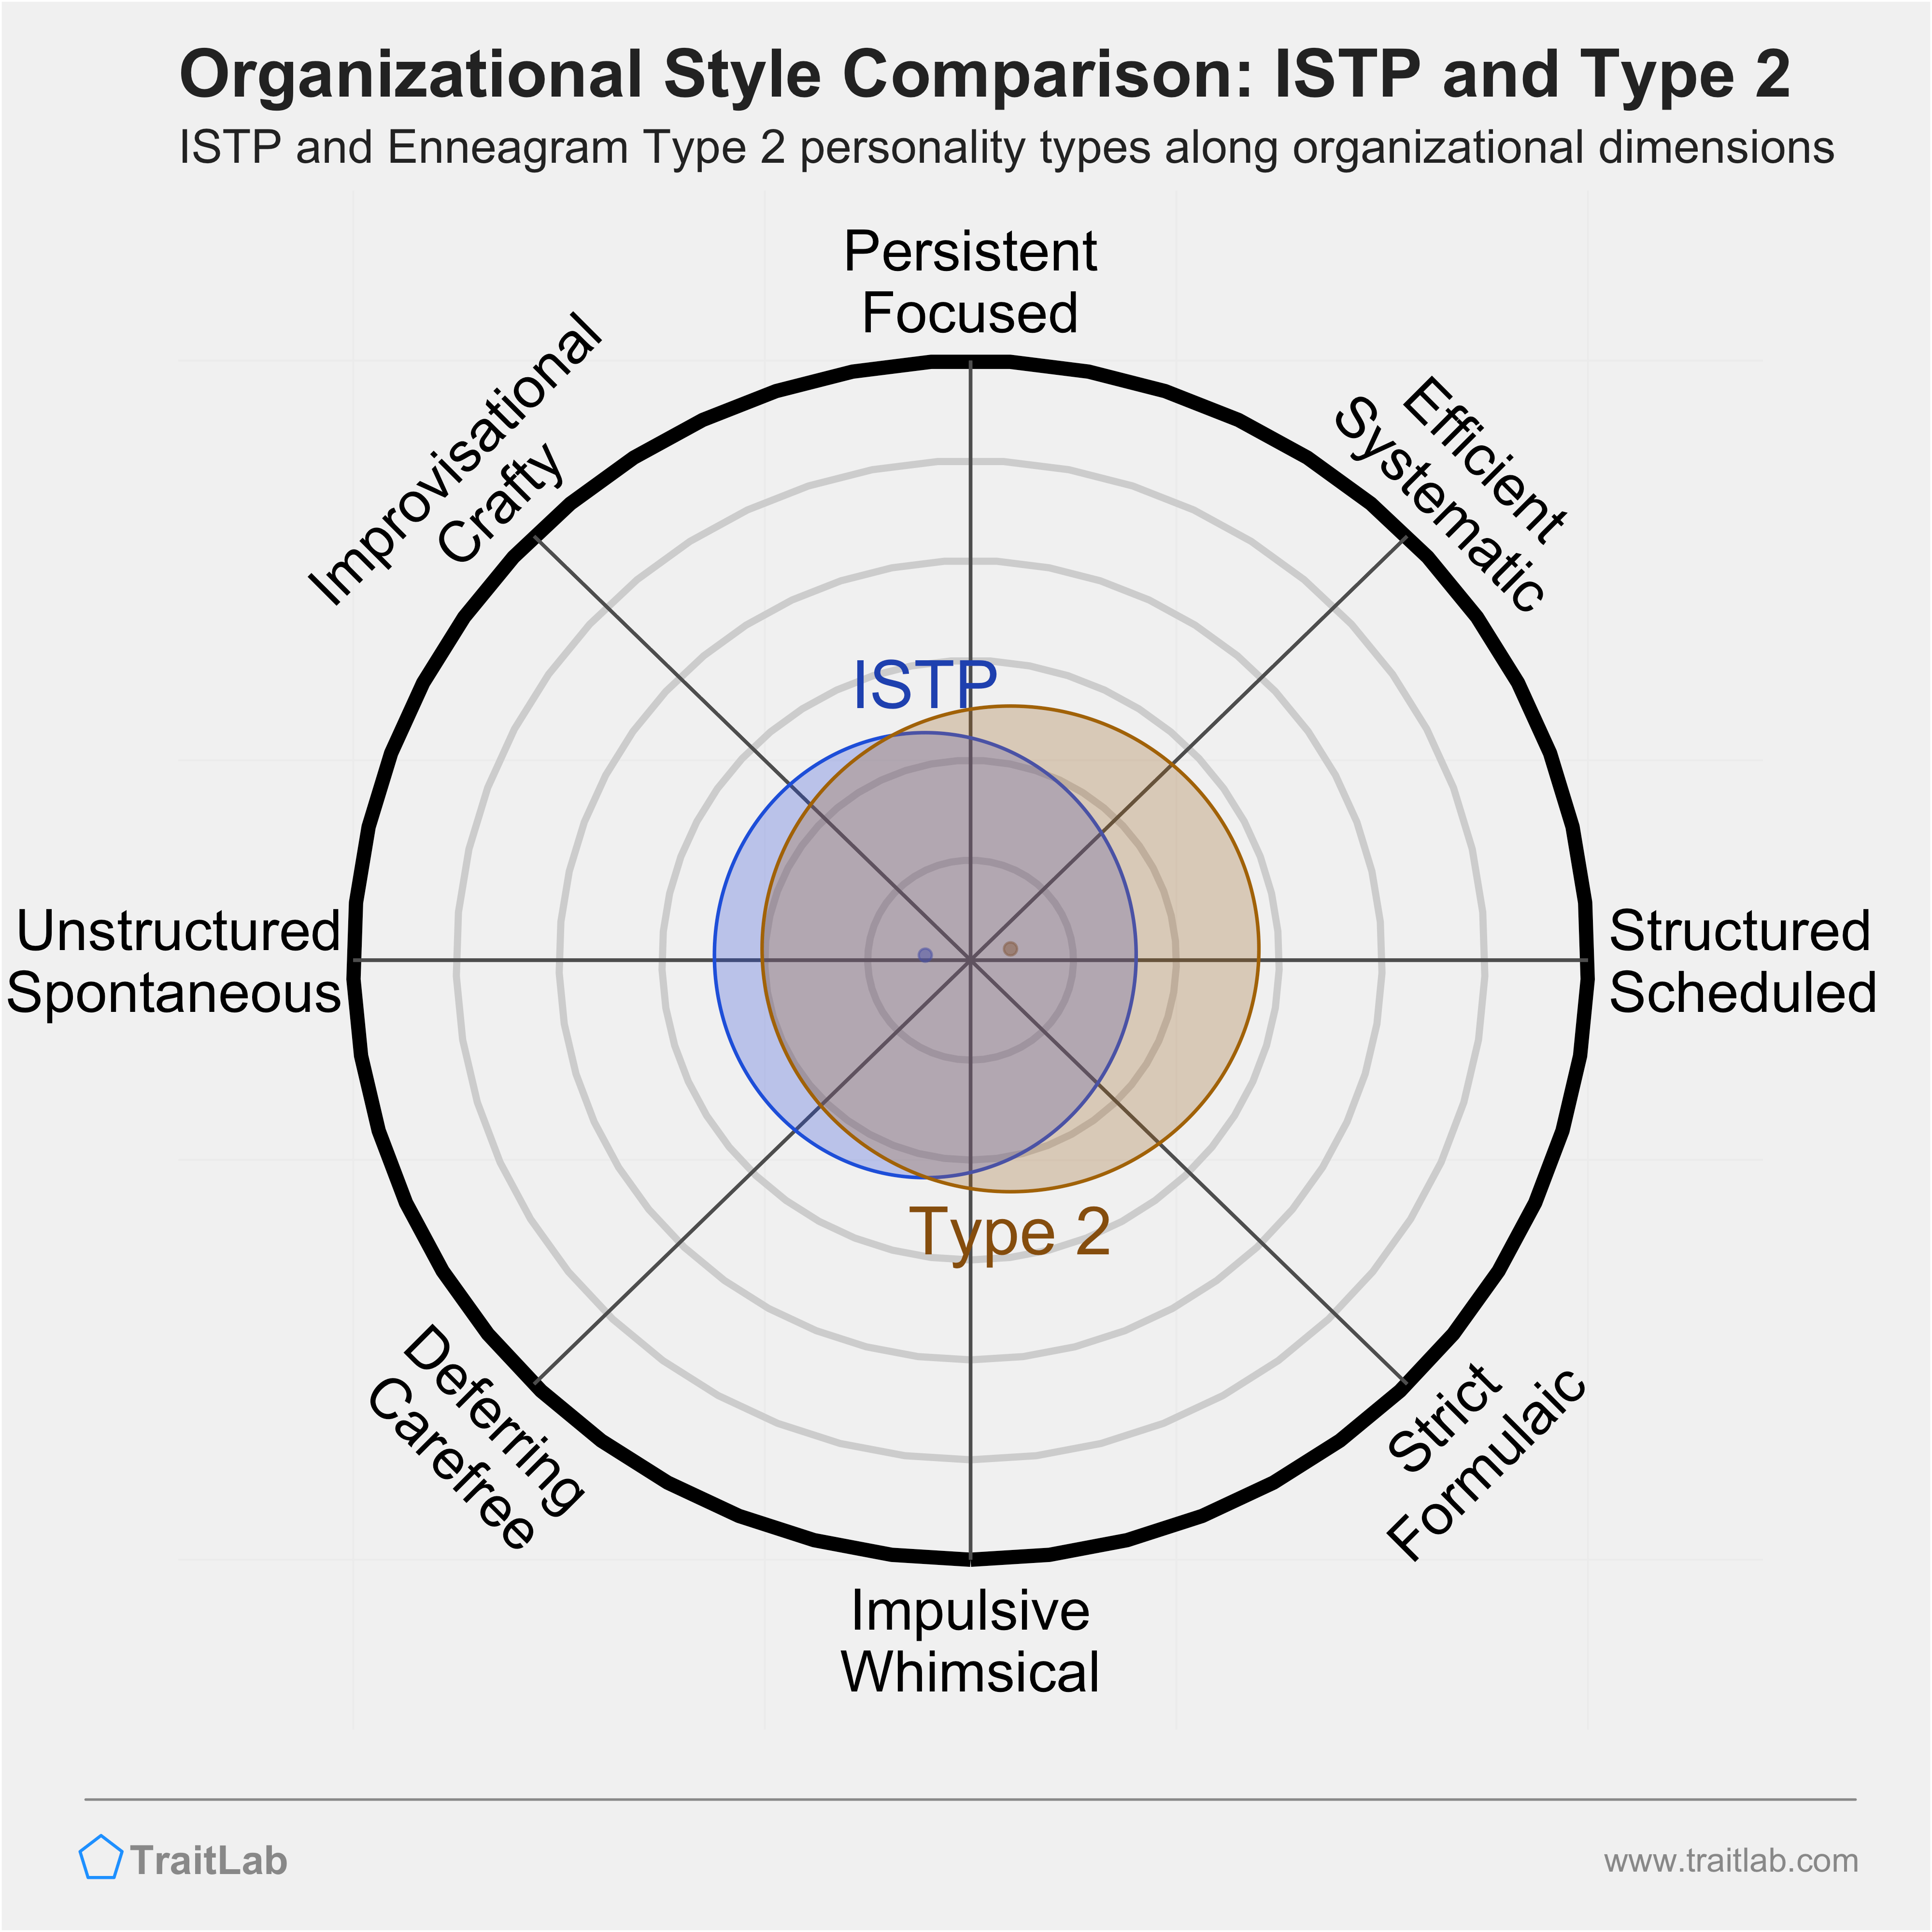 ISTP and Type 2 comparison across organizational dimensions